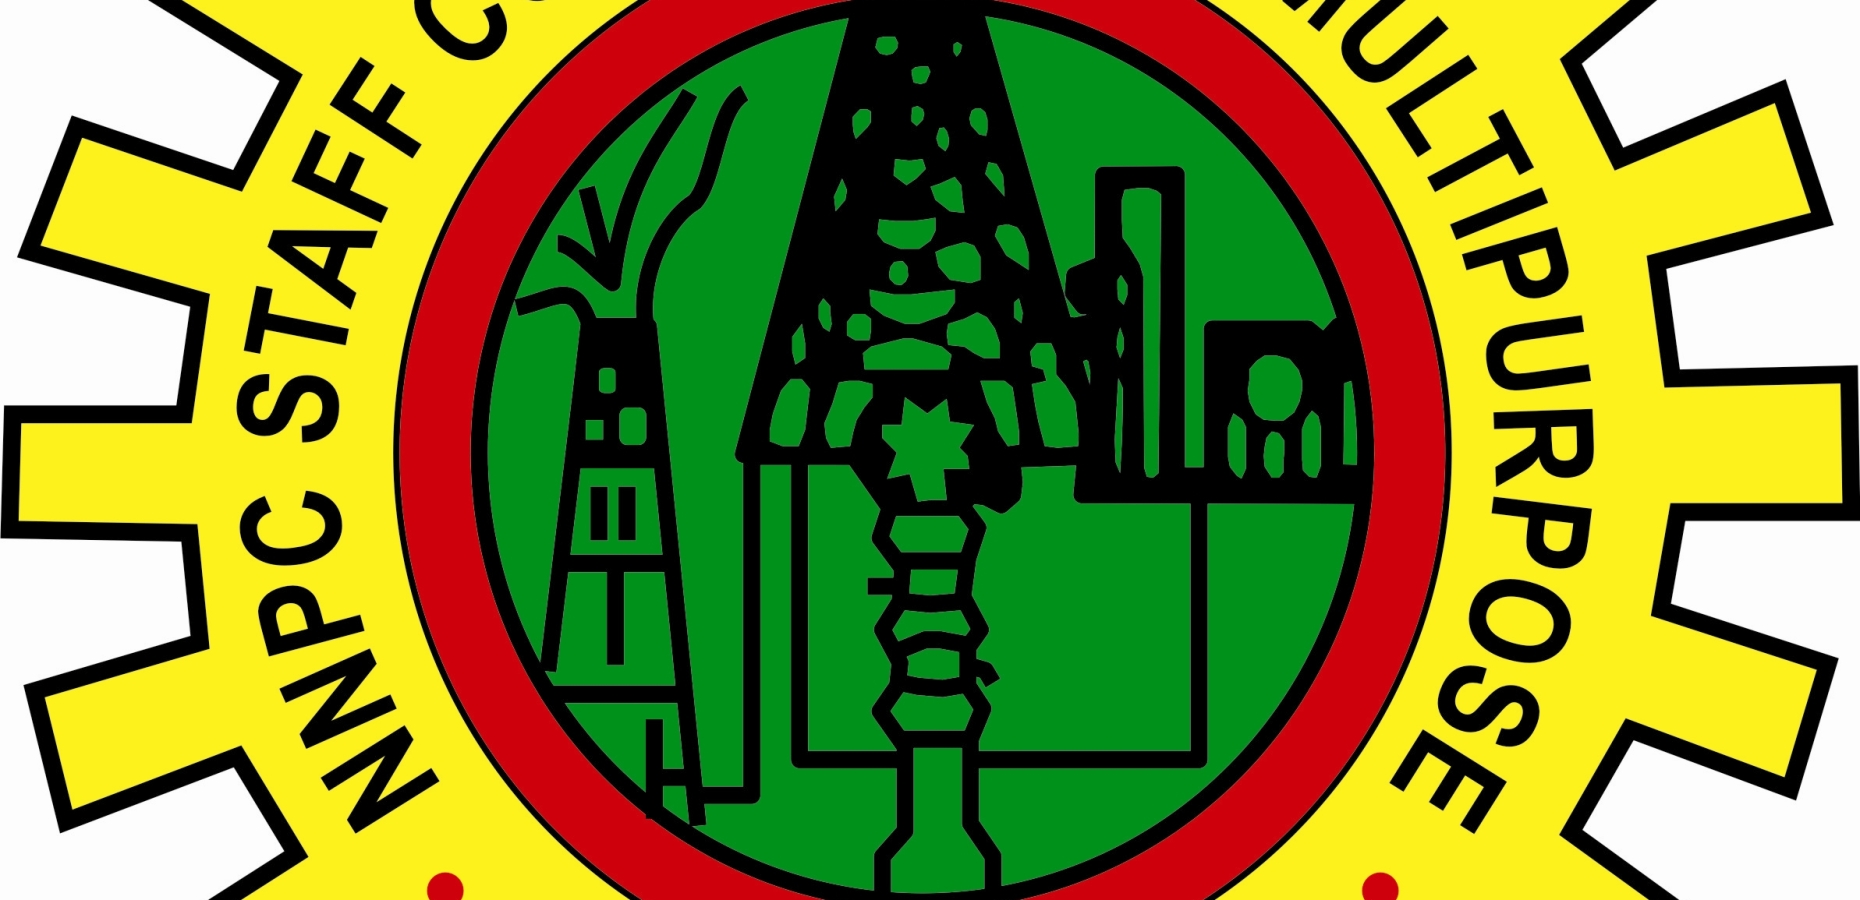 nnpc-recruitment-for-fresh-graduates-and-experience-hires-aply-now-ifoundit-blog